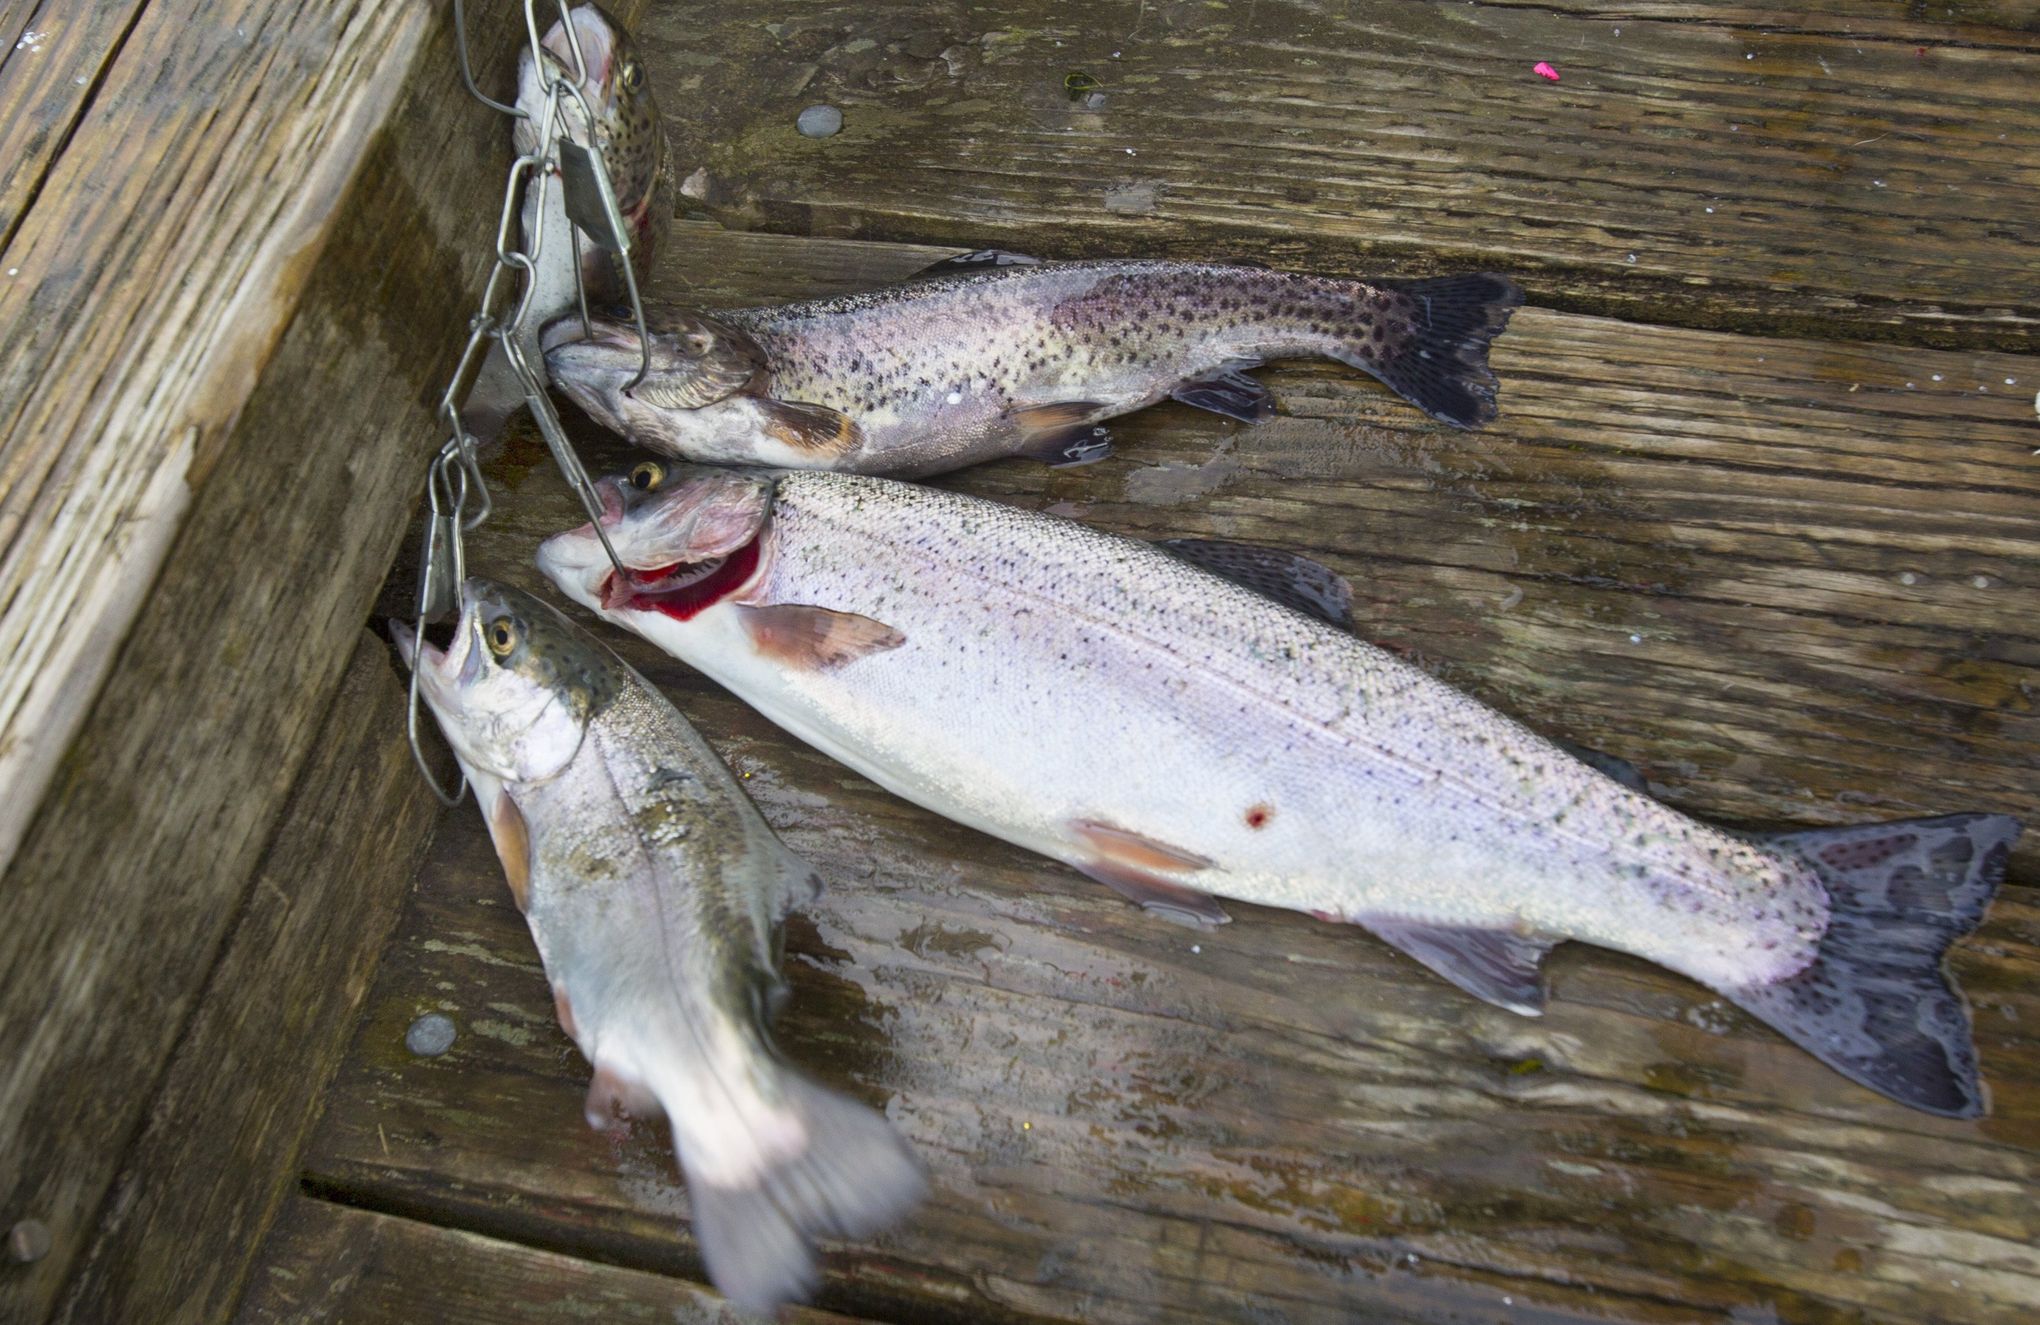 More lakes planted with trout to boost early spring fishing opportunities